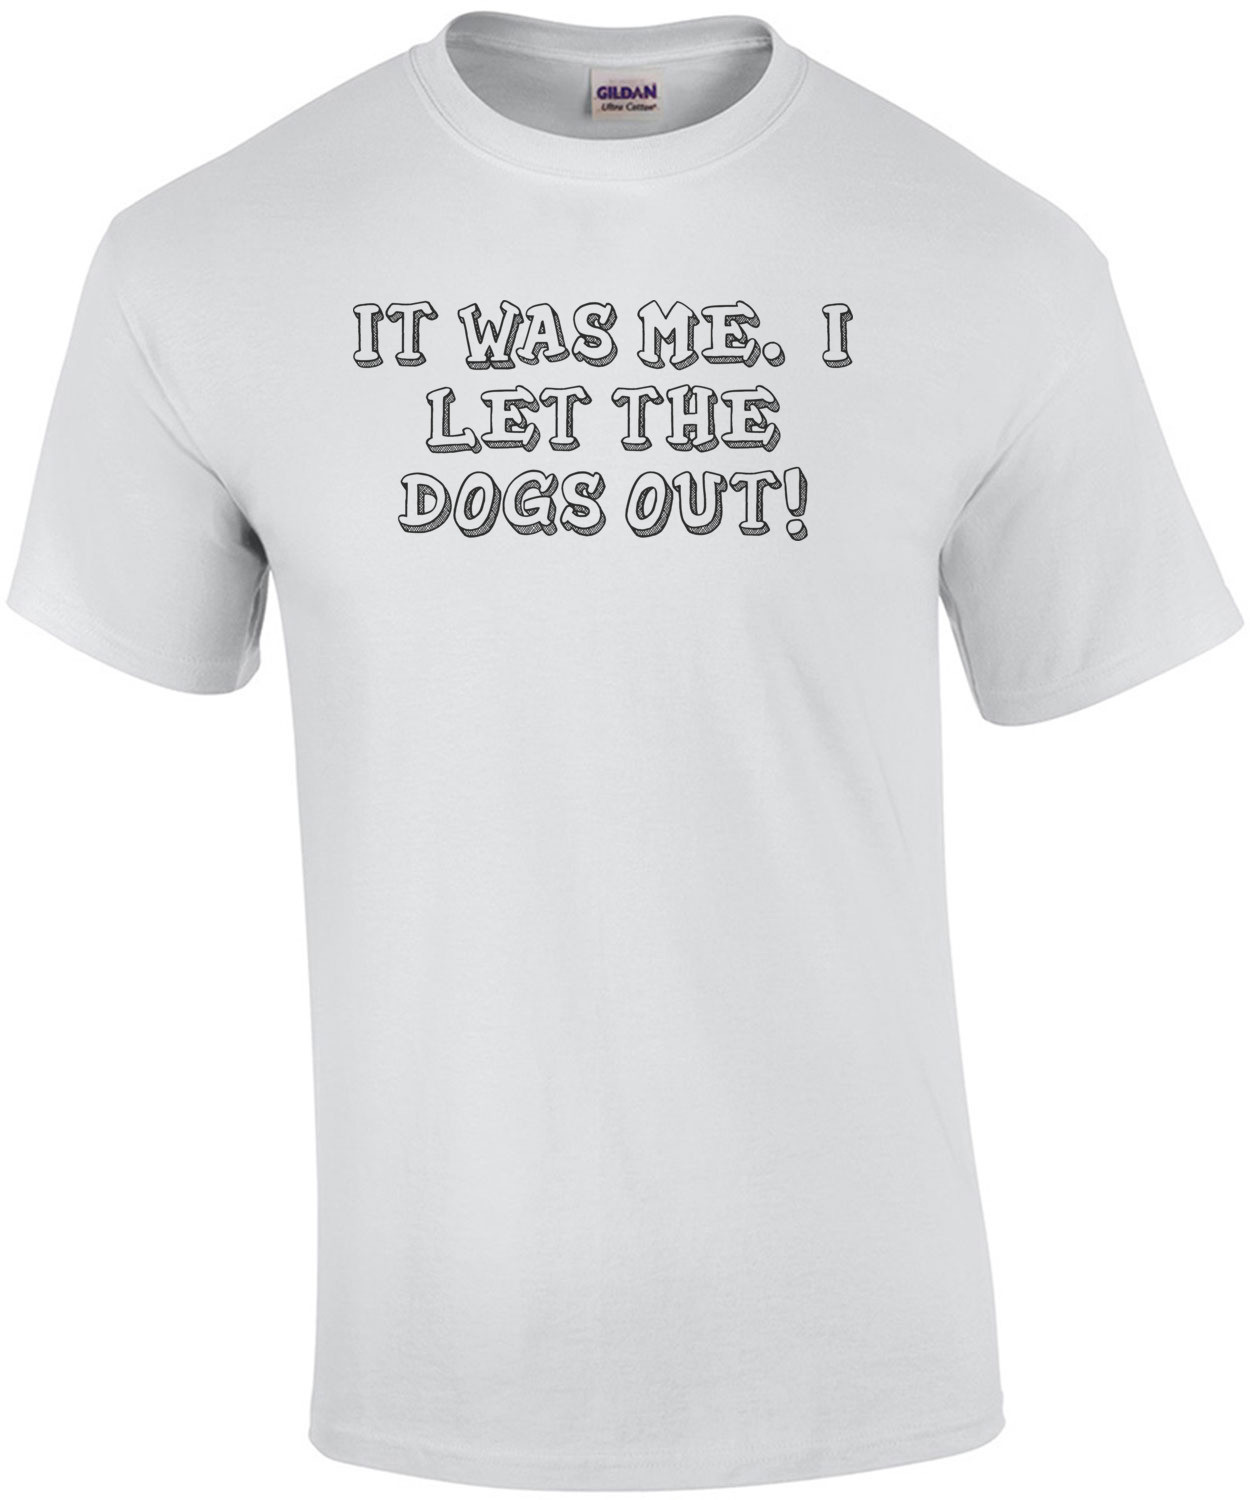 WHO LET THE DOGS OUT? Shirt